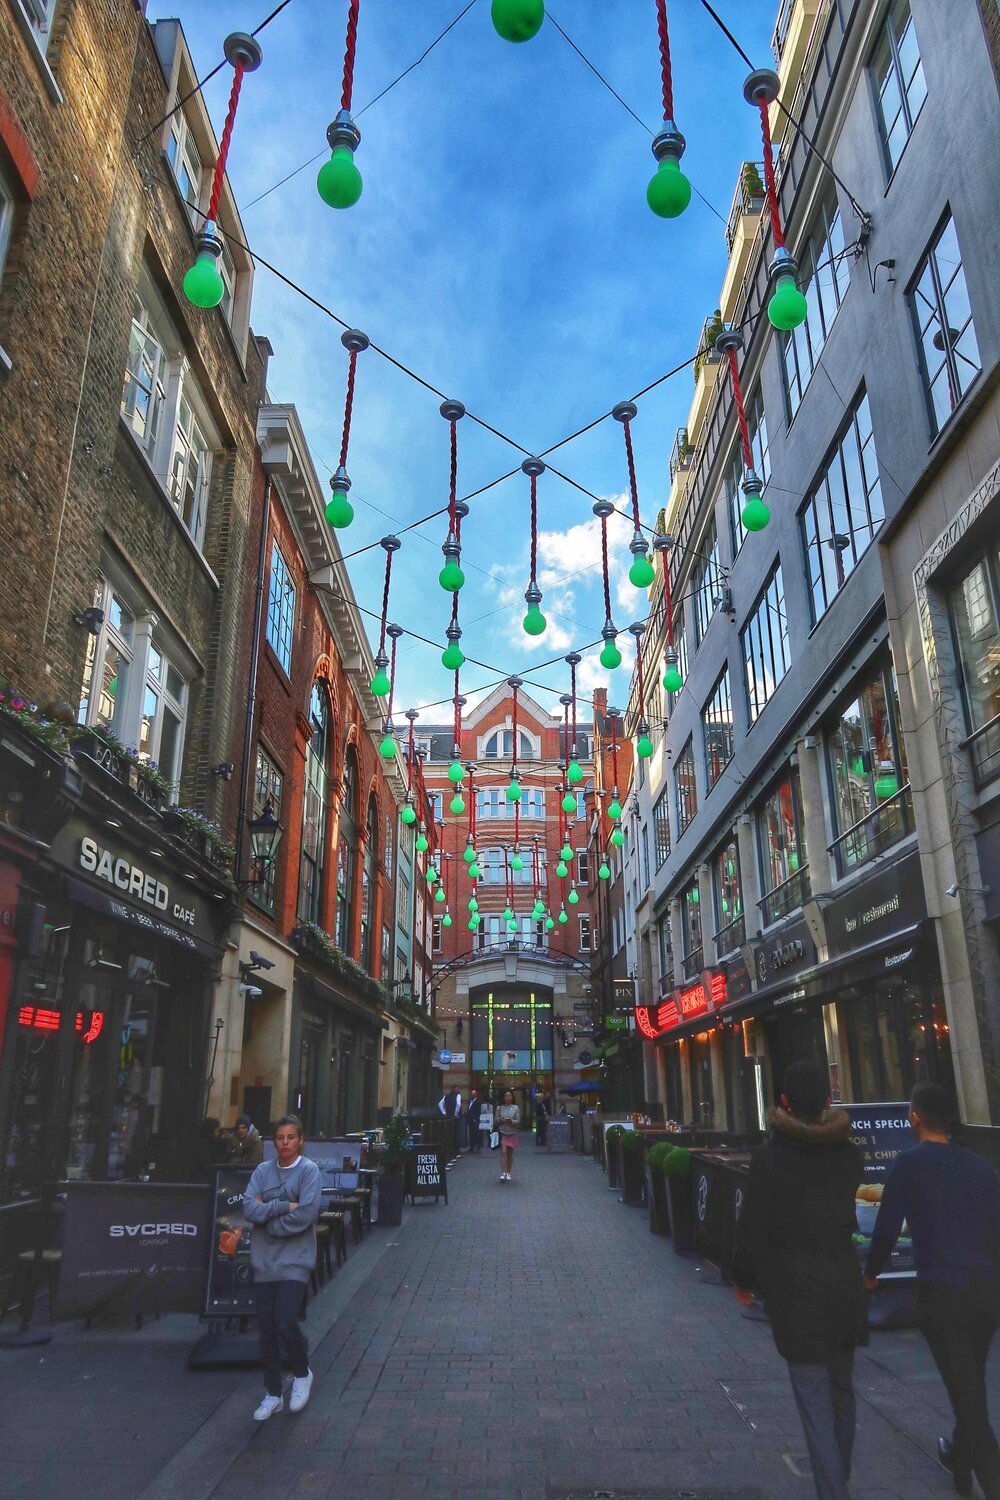 Christmas comes early in Carnaby in London, England.